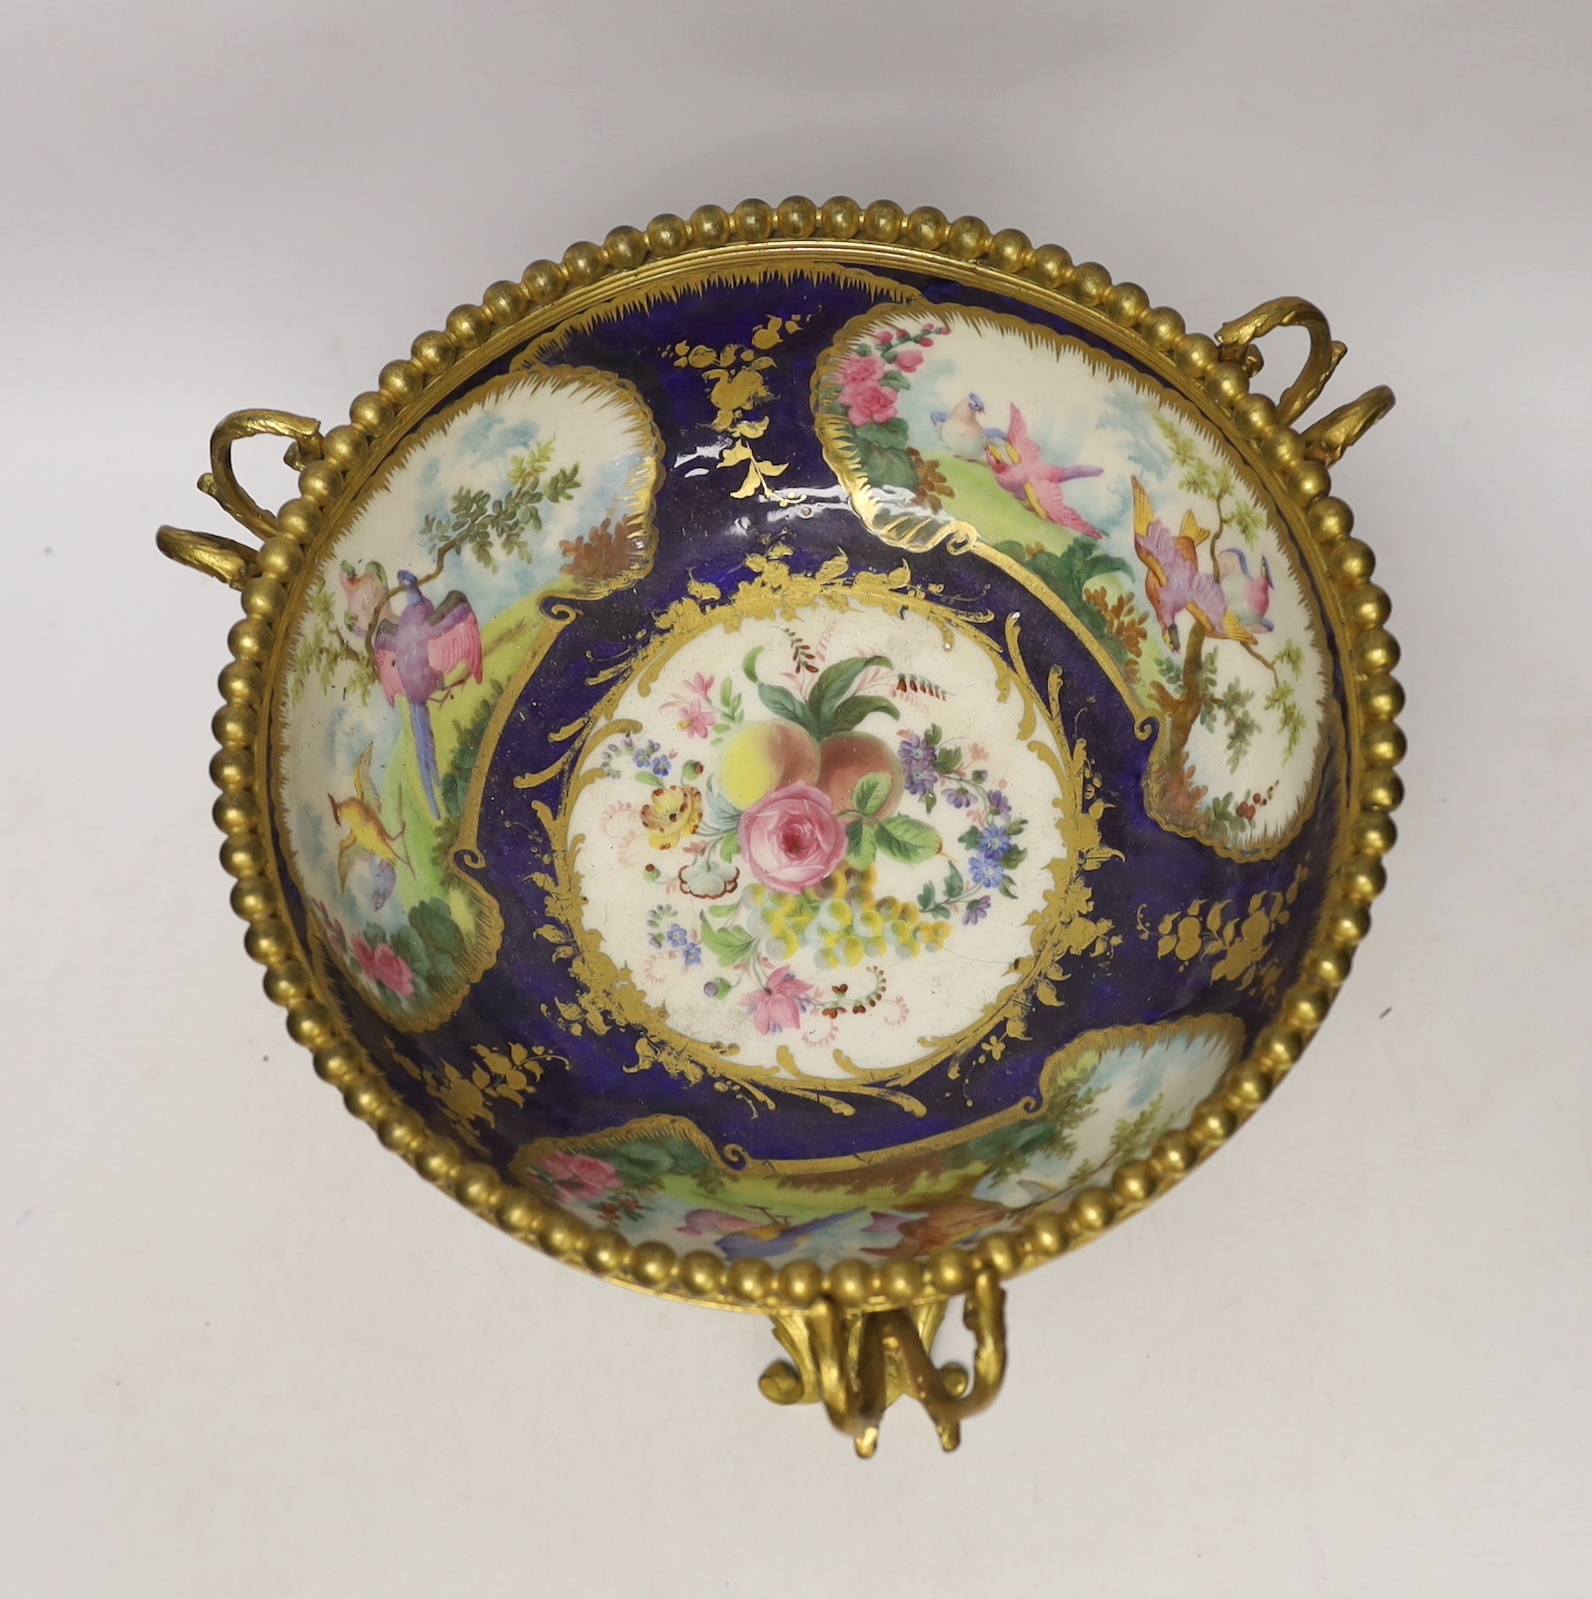 A 19th century ormolu mounted Sevres style porcelain bowl, 25cm - Image 3 of 4